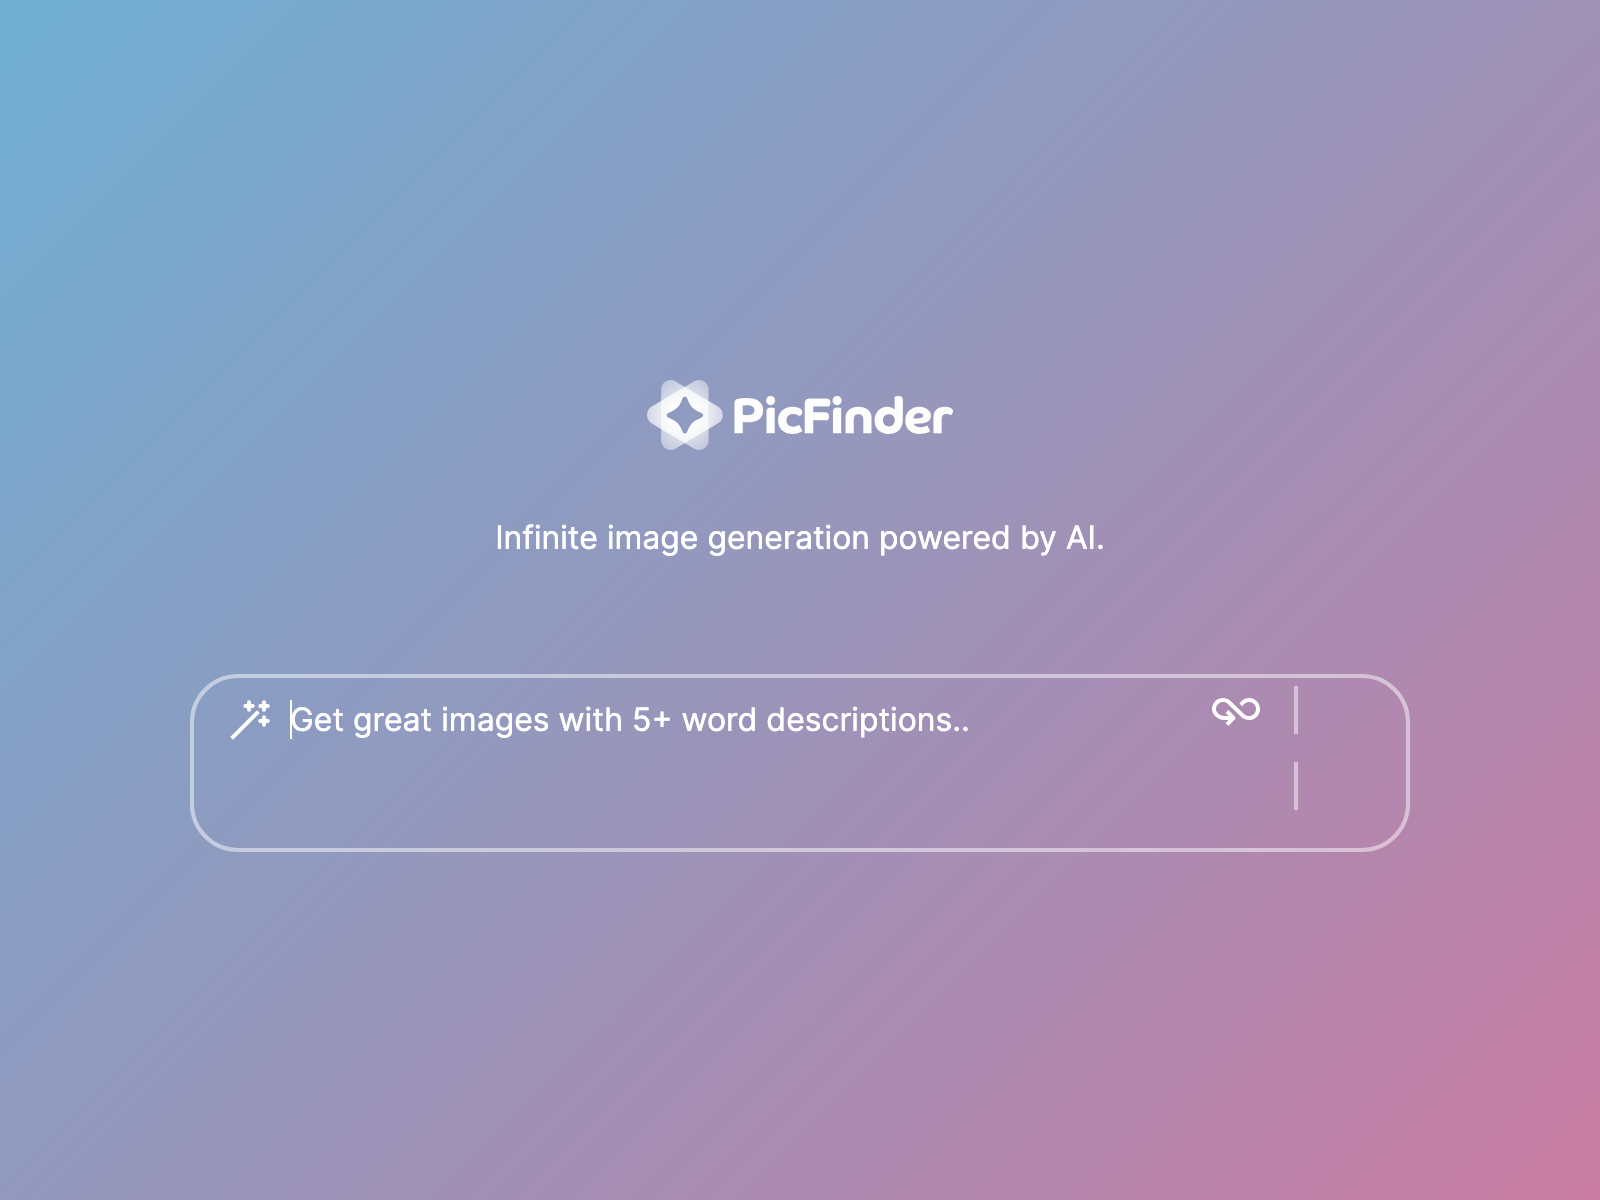 picfinder Review: Pros, Cons, Alternatives